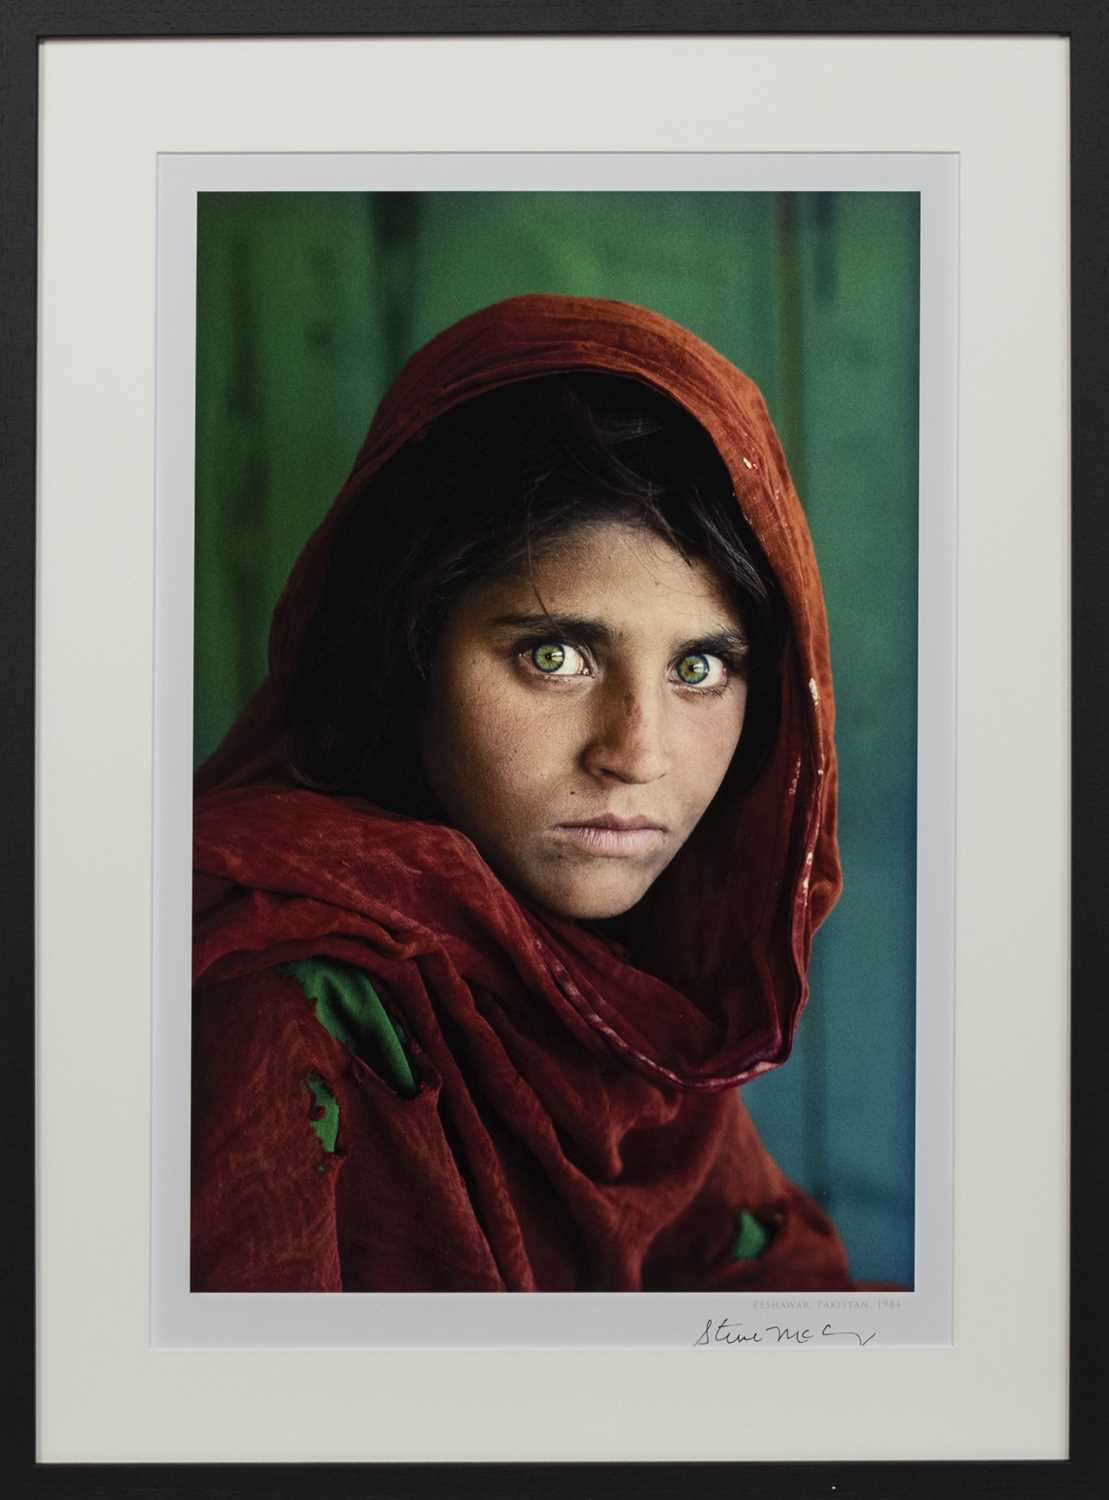 Lot 160 - SHARBAT GULA, AFGHAN GIRL, PAKISTAN, A SIGNED LITHOGRAPH BY STEVE MCCURRY